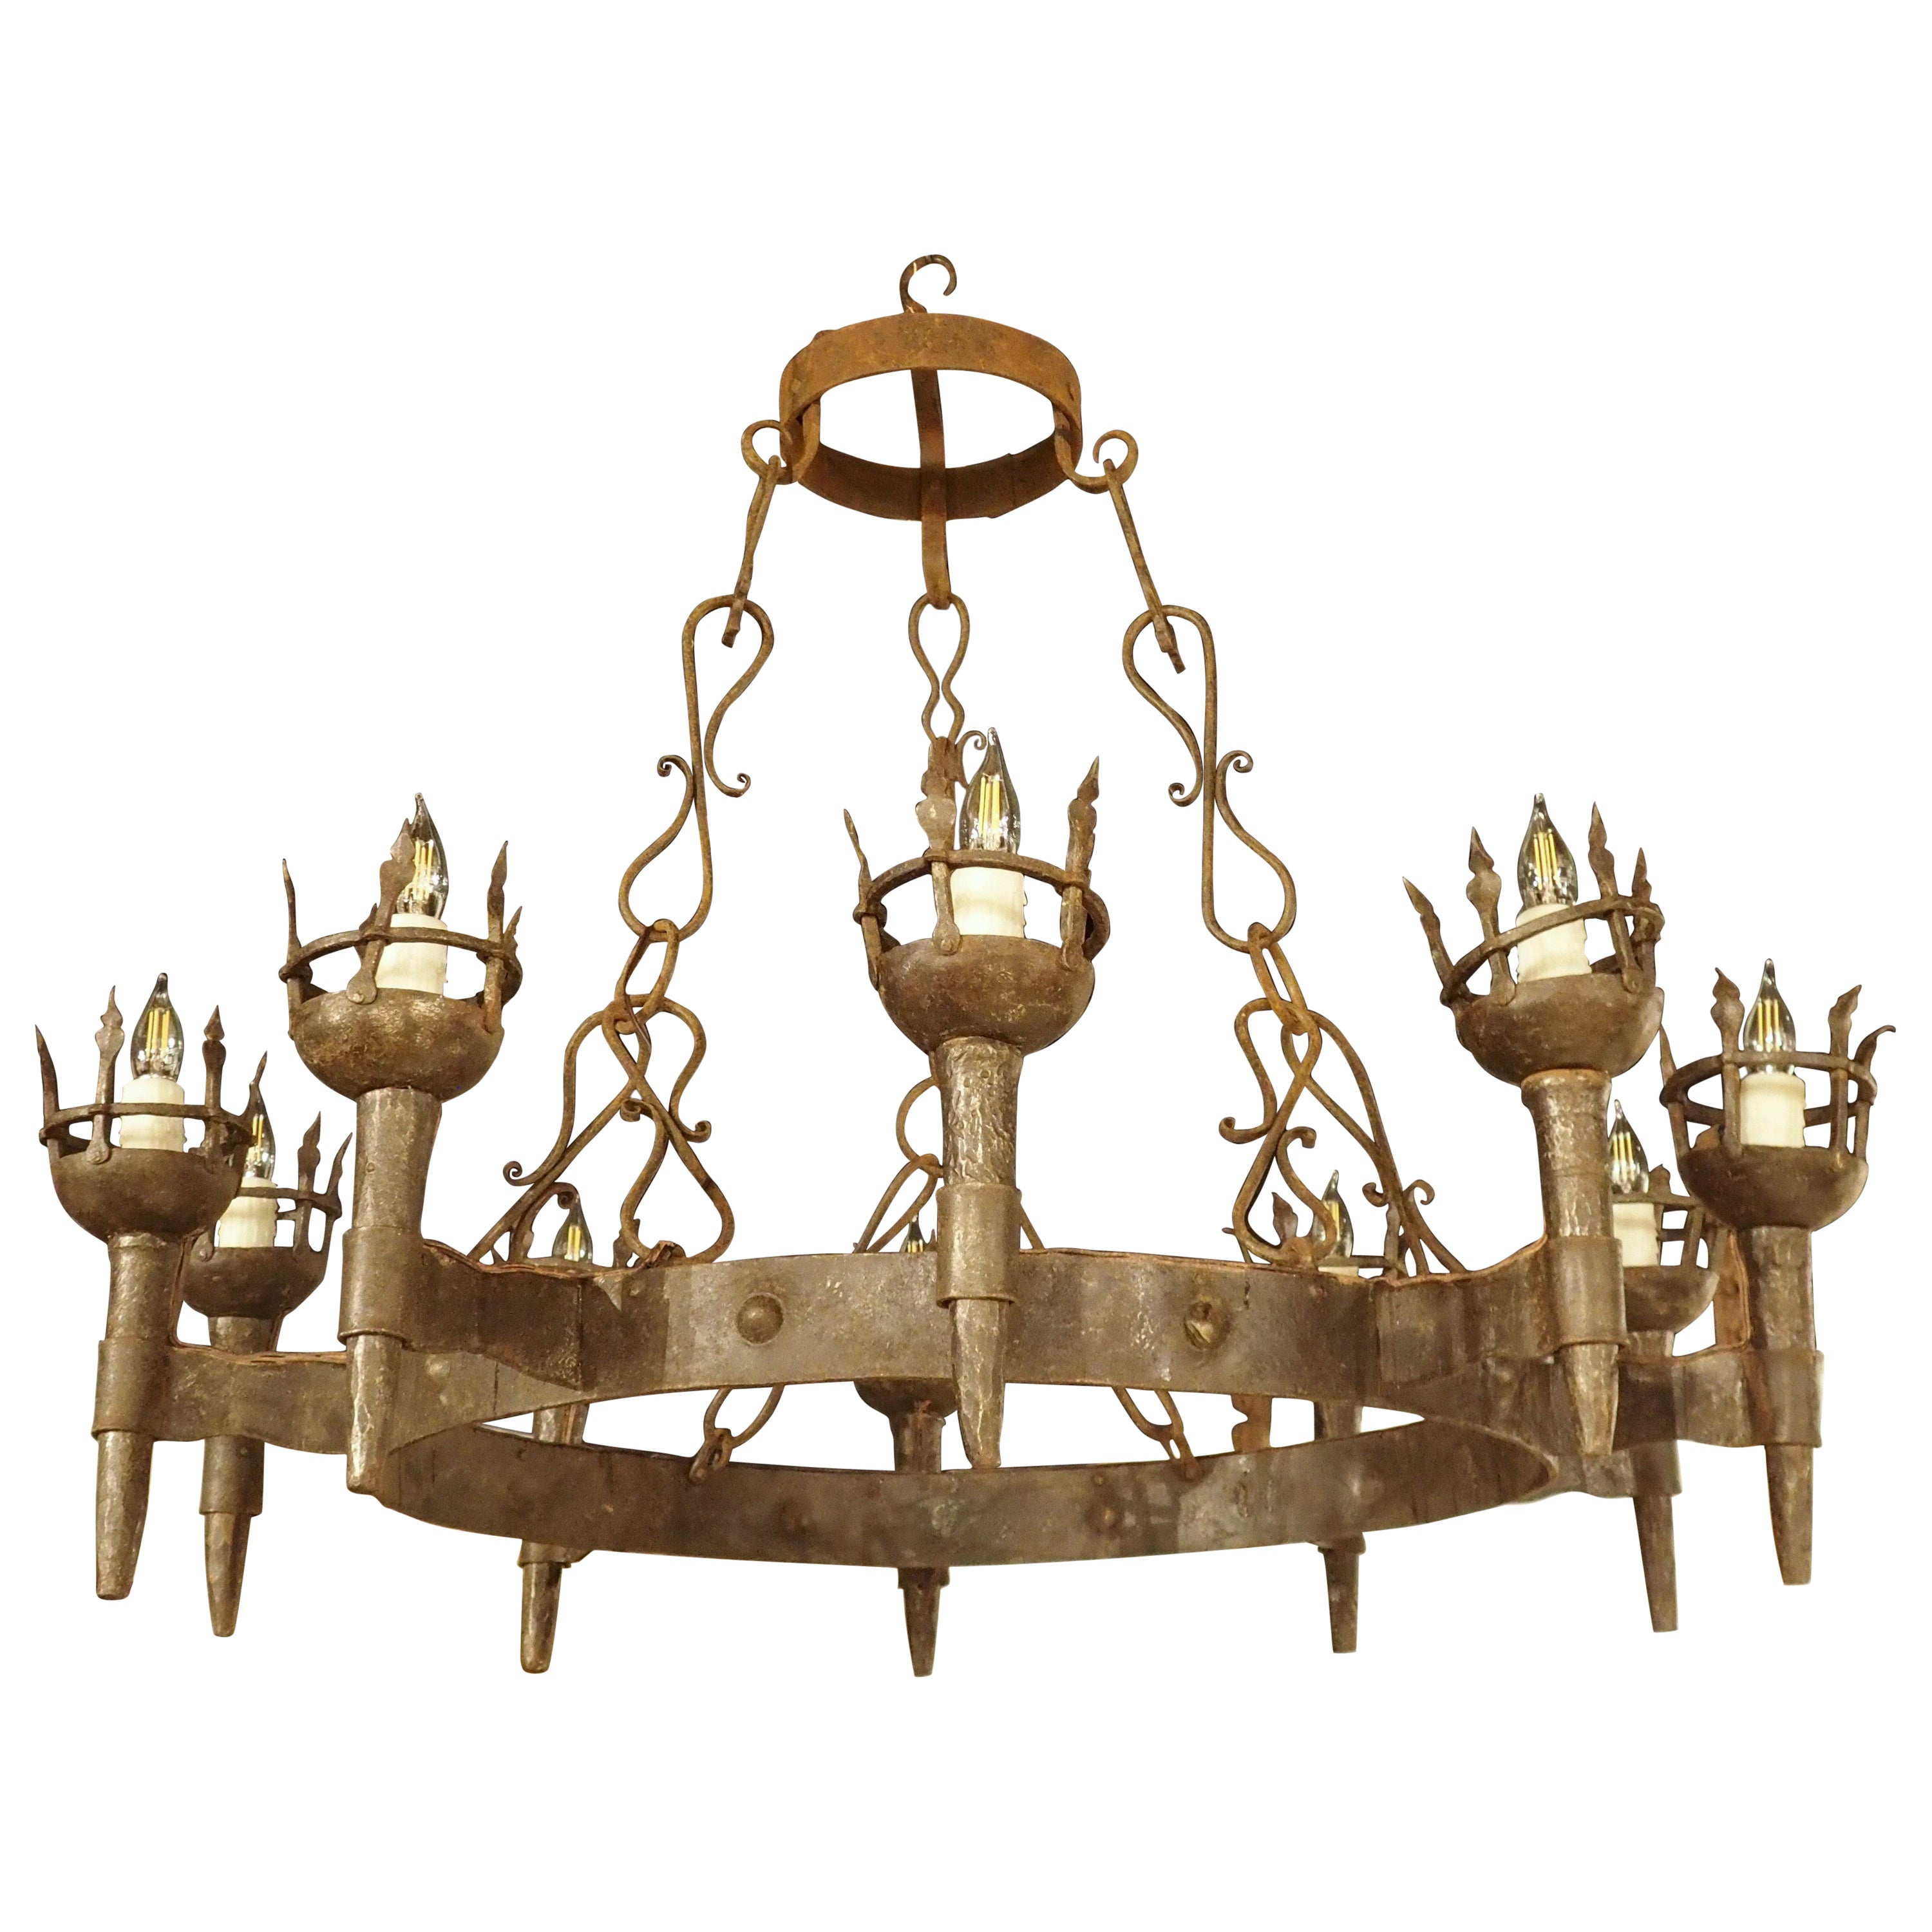 Large Antique Wrought Iron 10-Light Torch Chandelier from France, Late 1800s